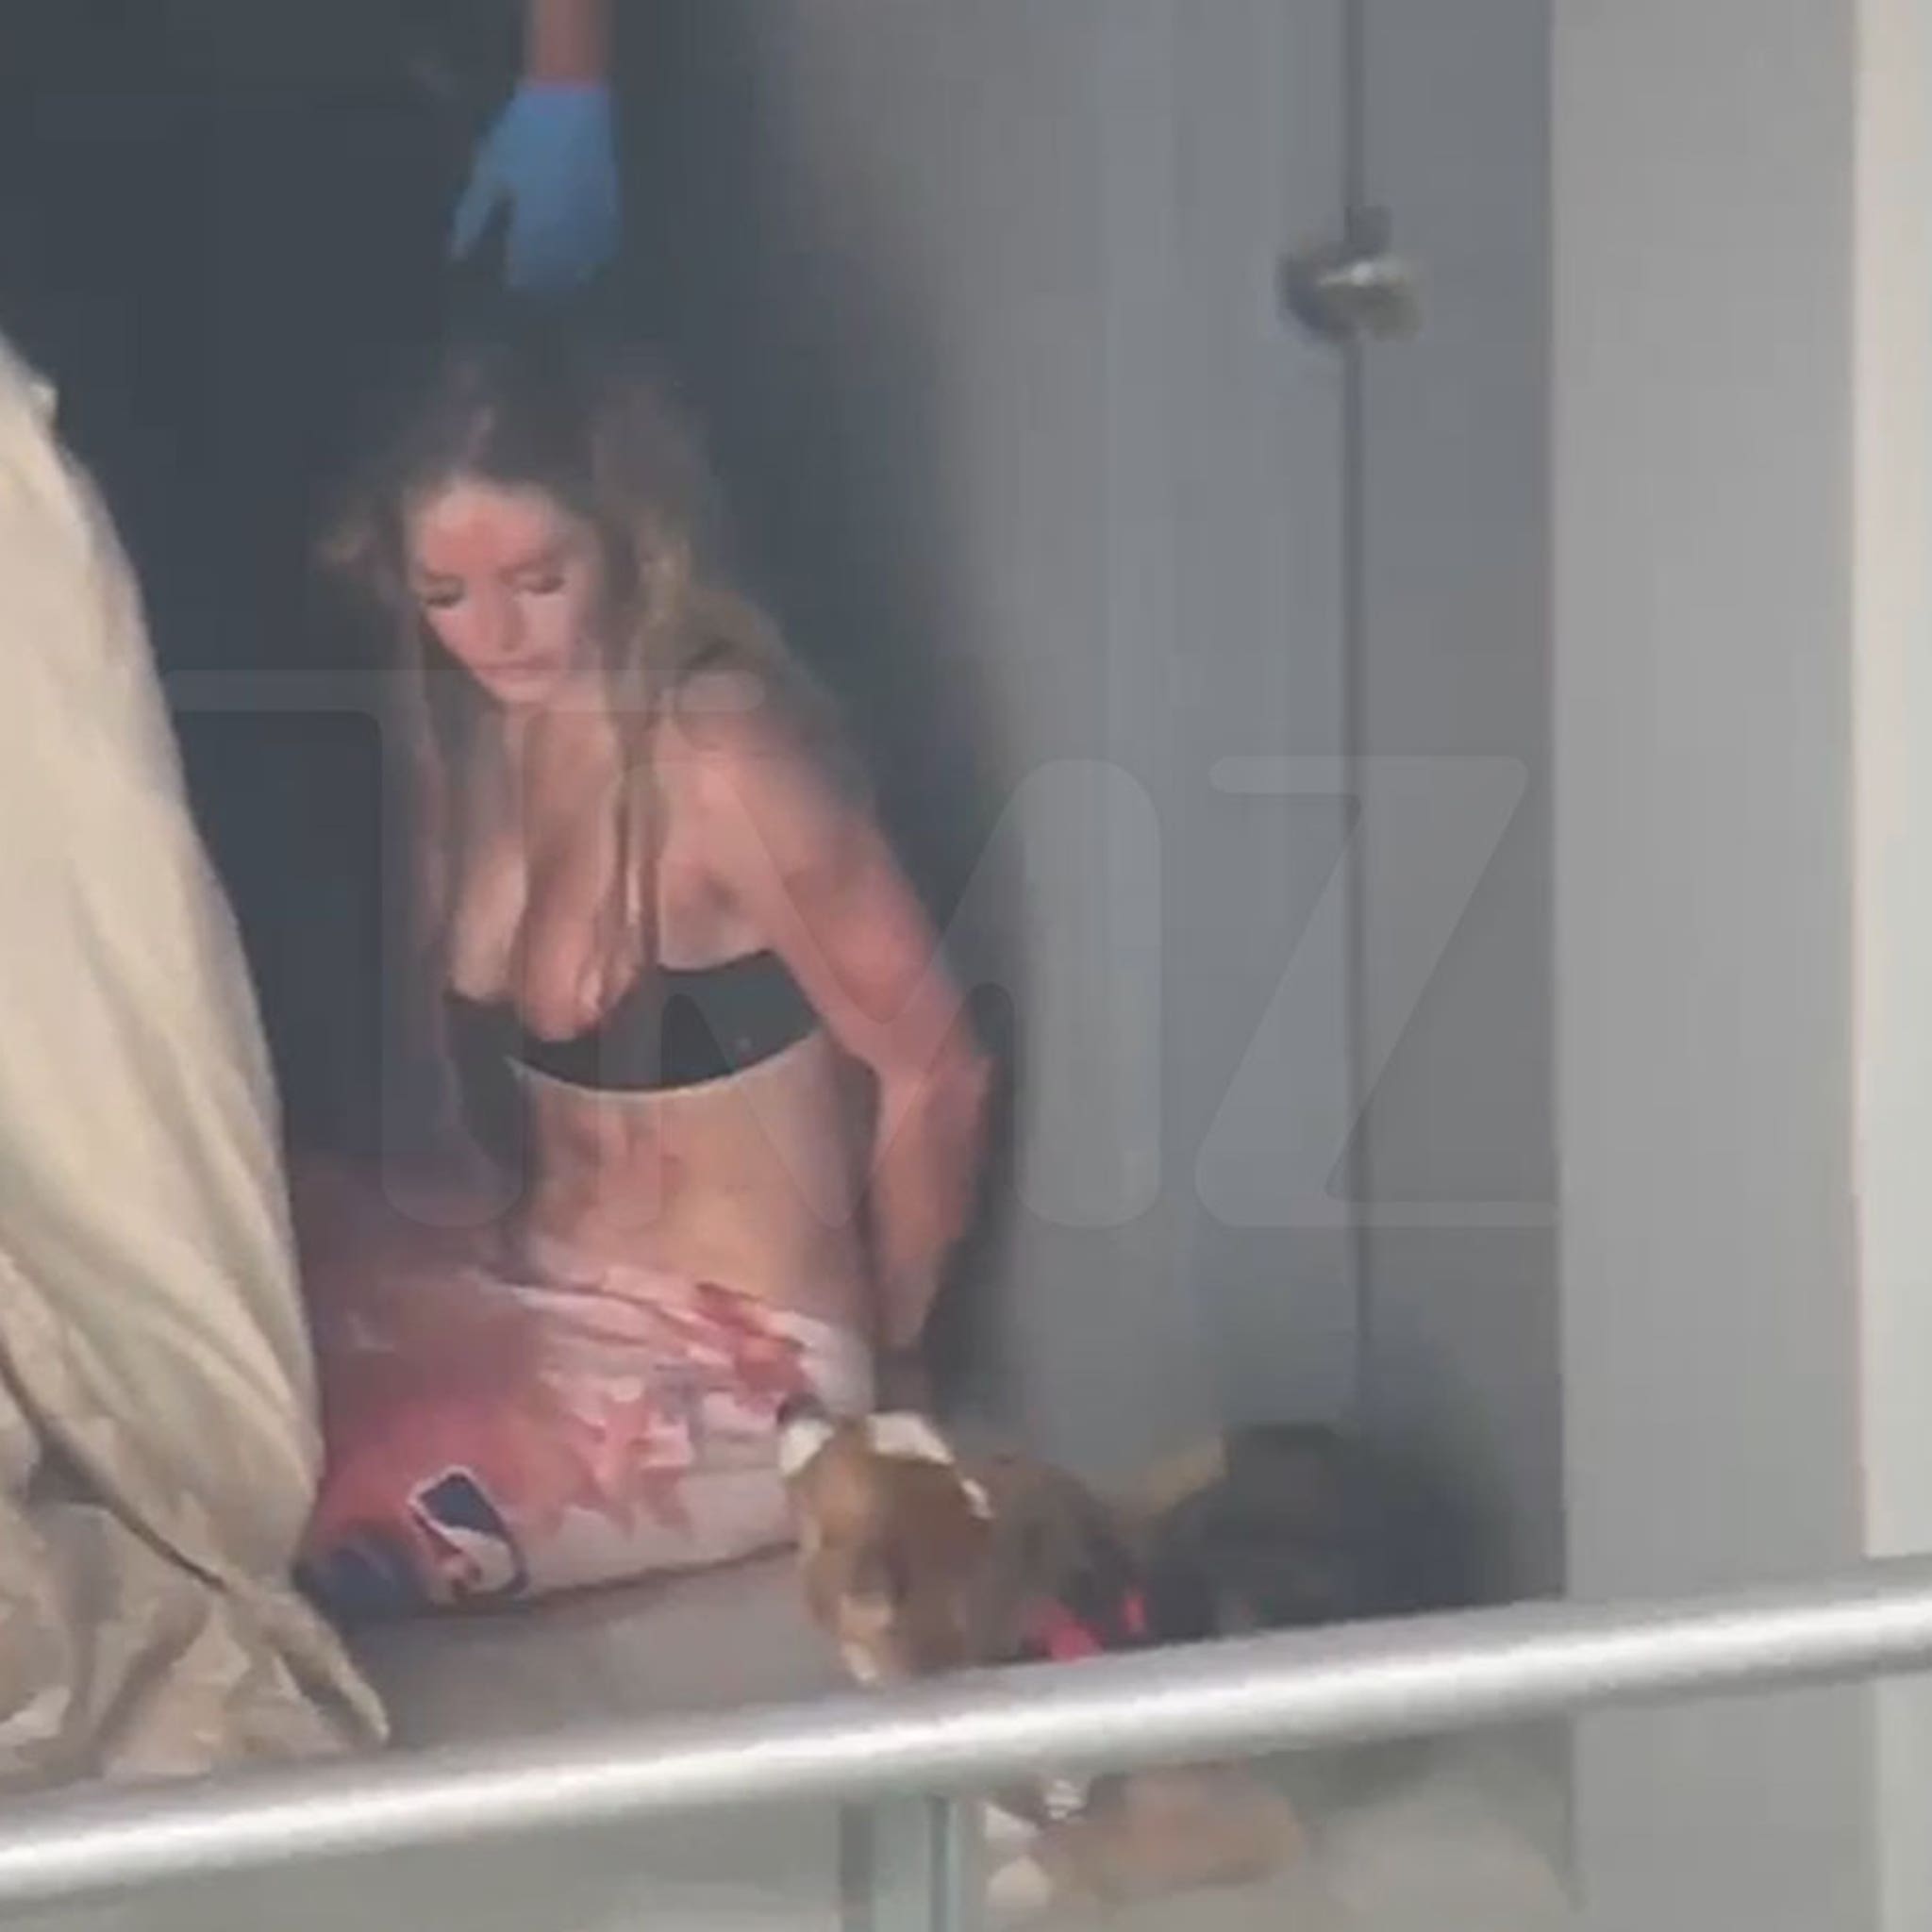 Video From Fatal Miami Stabbing Shows IG Model Covered In Blood